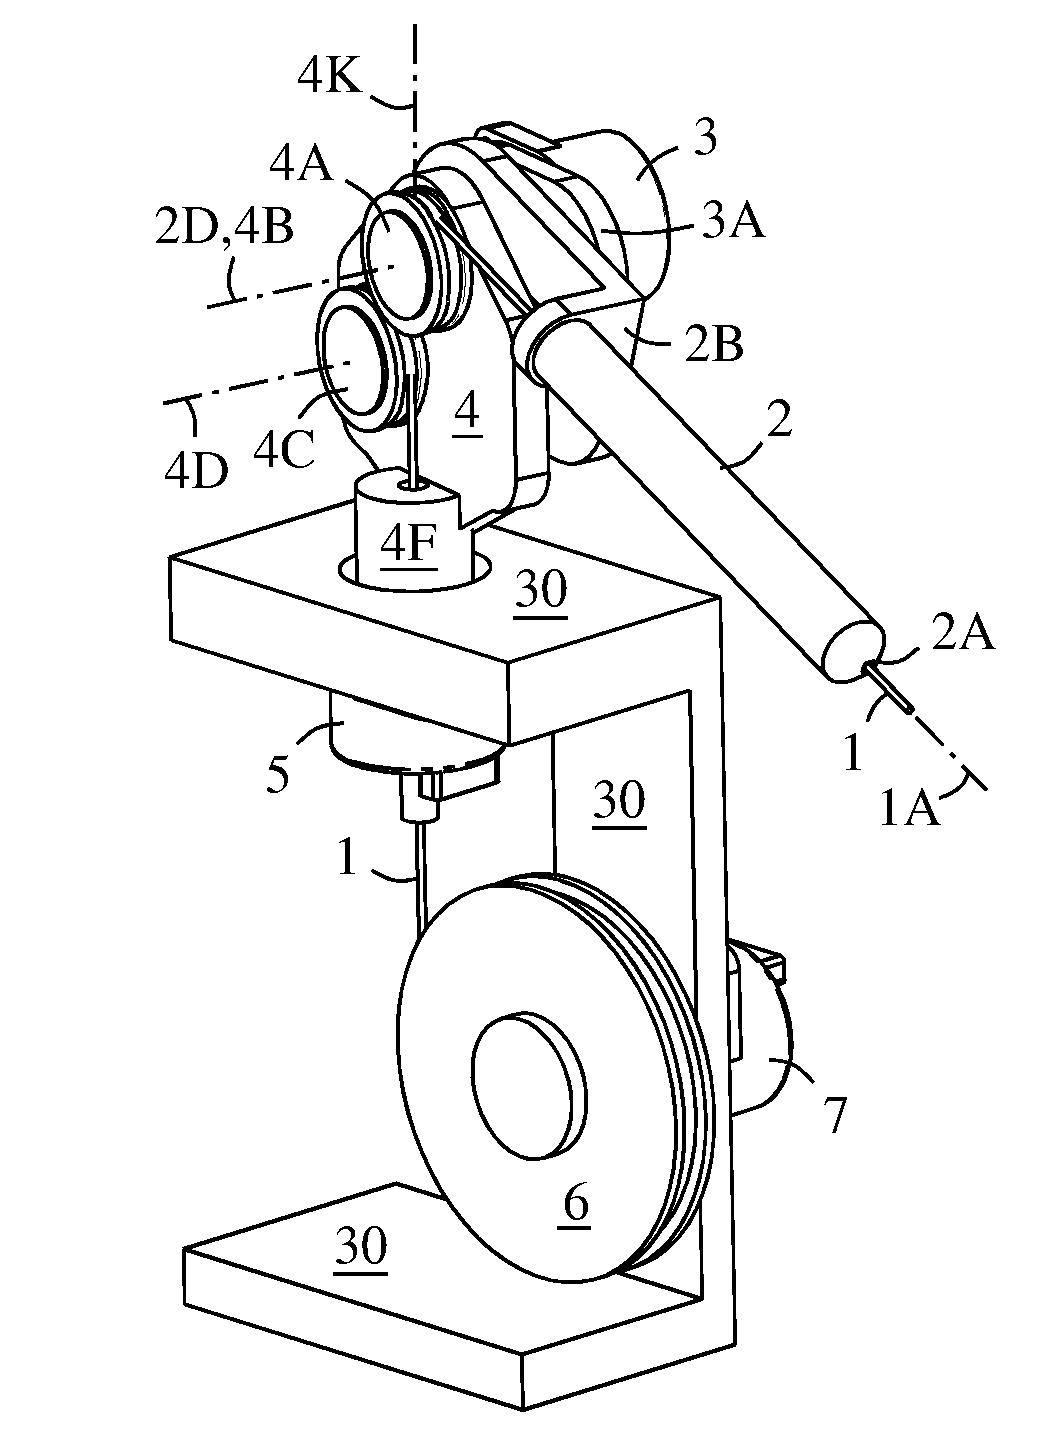 3-dimensional cable guide and cable based position transducer